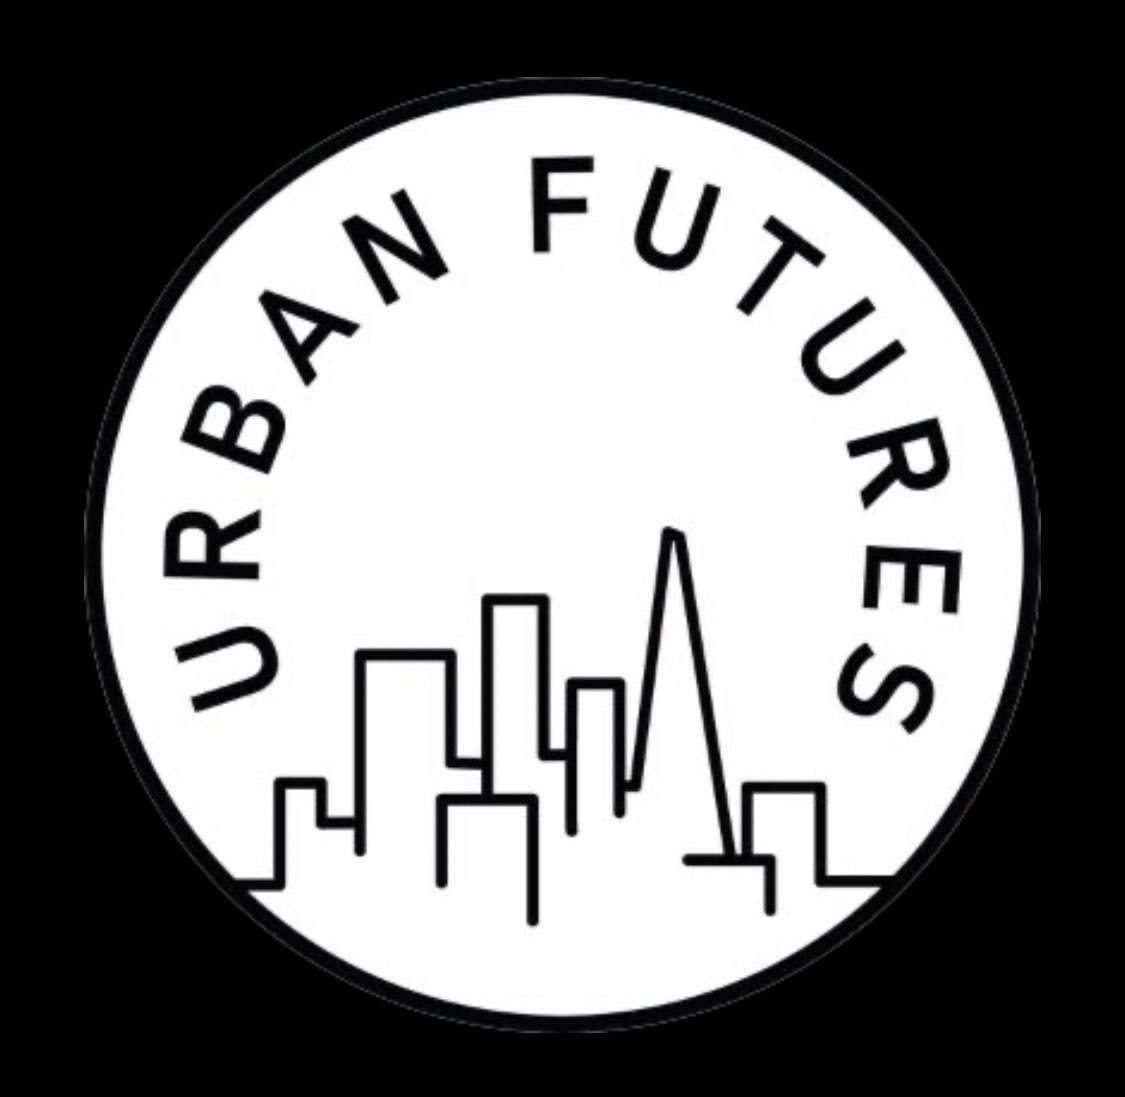 Follow us! @KCLUrbanFutures 

For all things critical on the urban age and its futures.

I’m newly at the helm of the @kclgeography research group following on from @PhilHubbard1 

#urbangeography #urbanstudies #geography